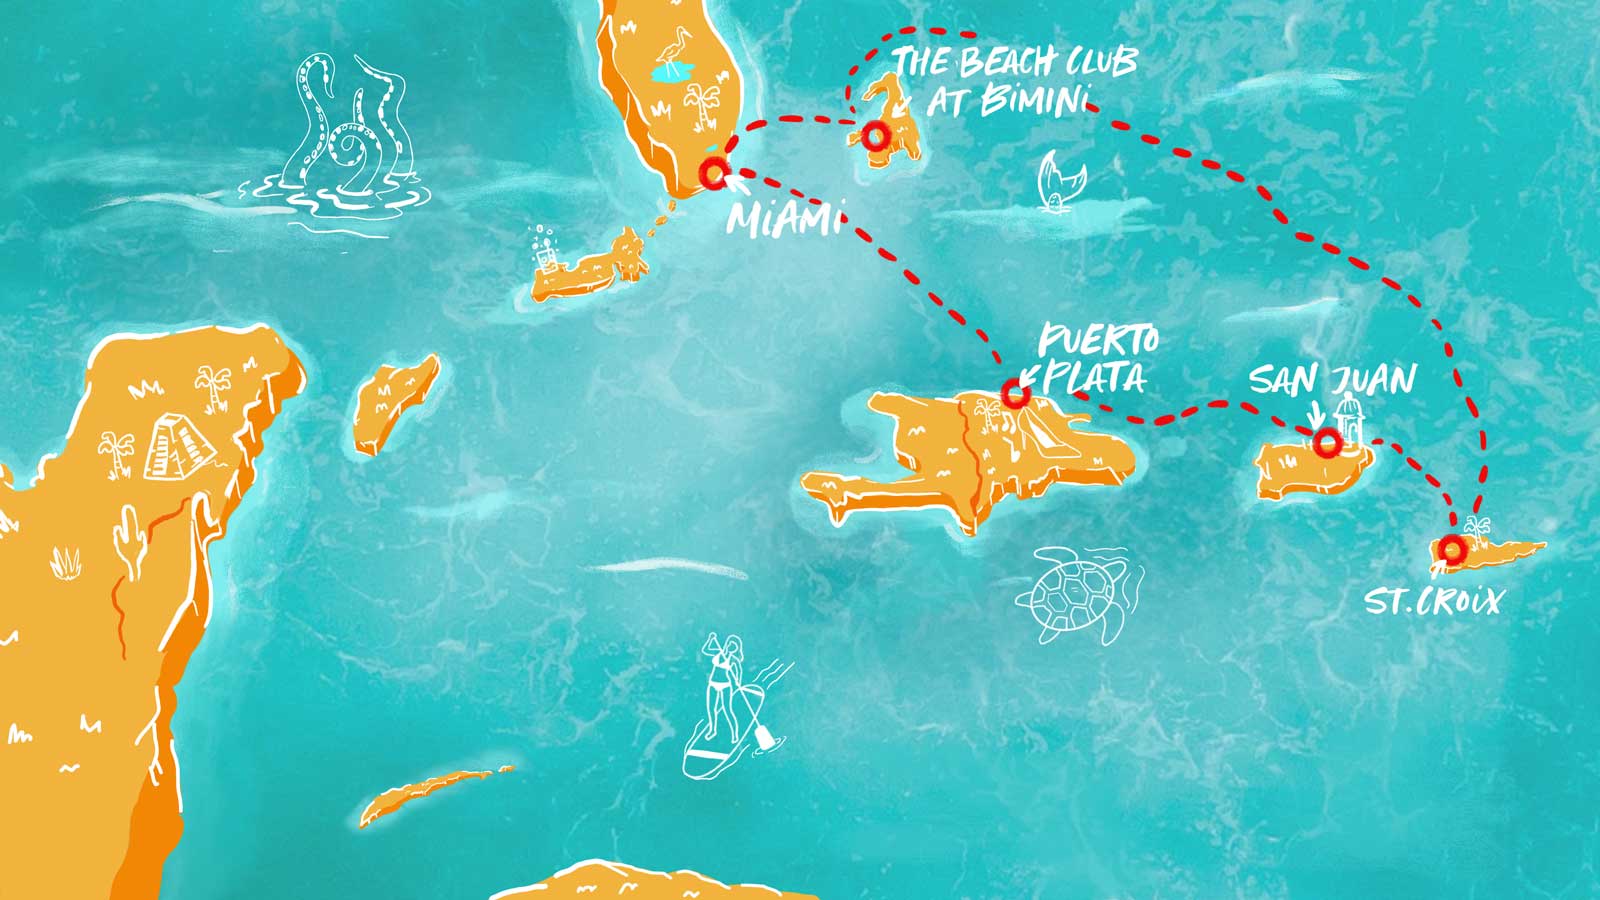 Eastern Caribbean Antilles 8-night itinerary
Caribbean maps and itinerary 16x9